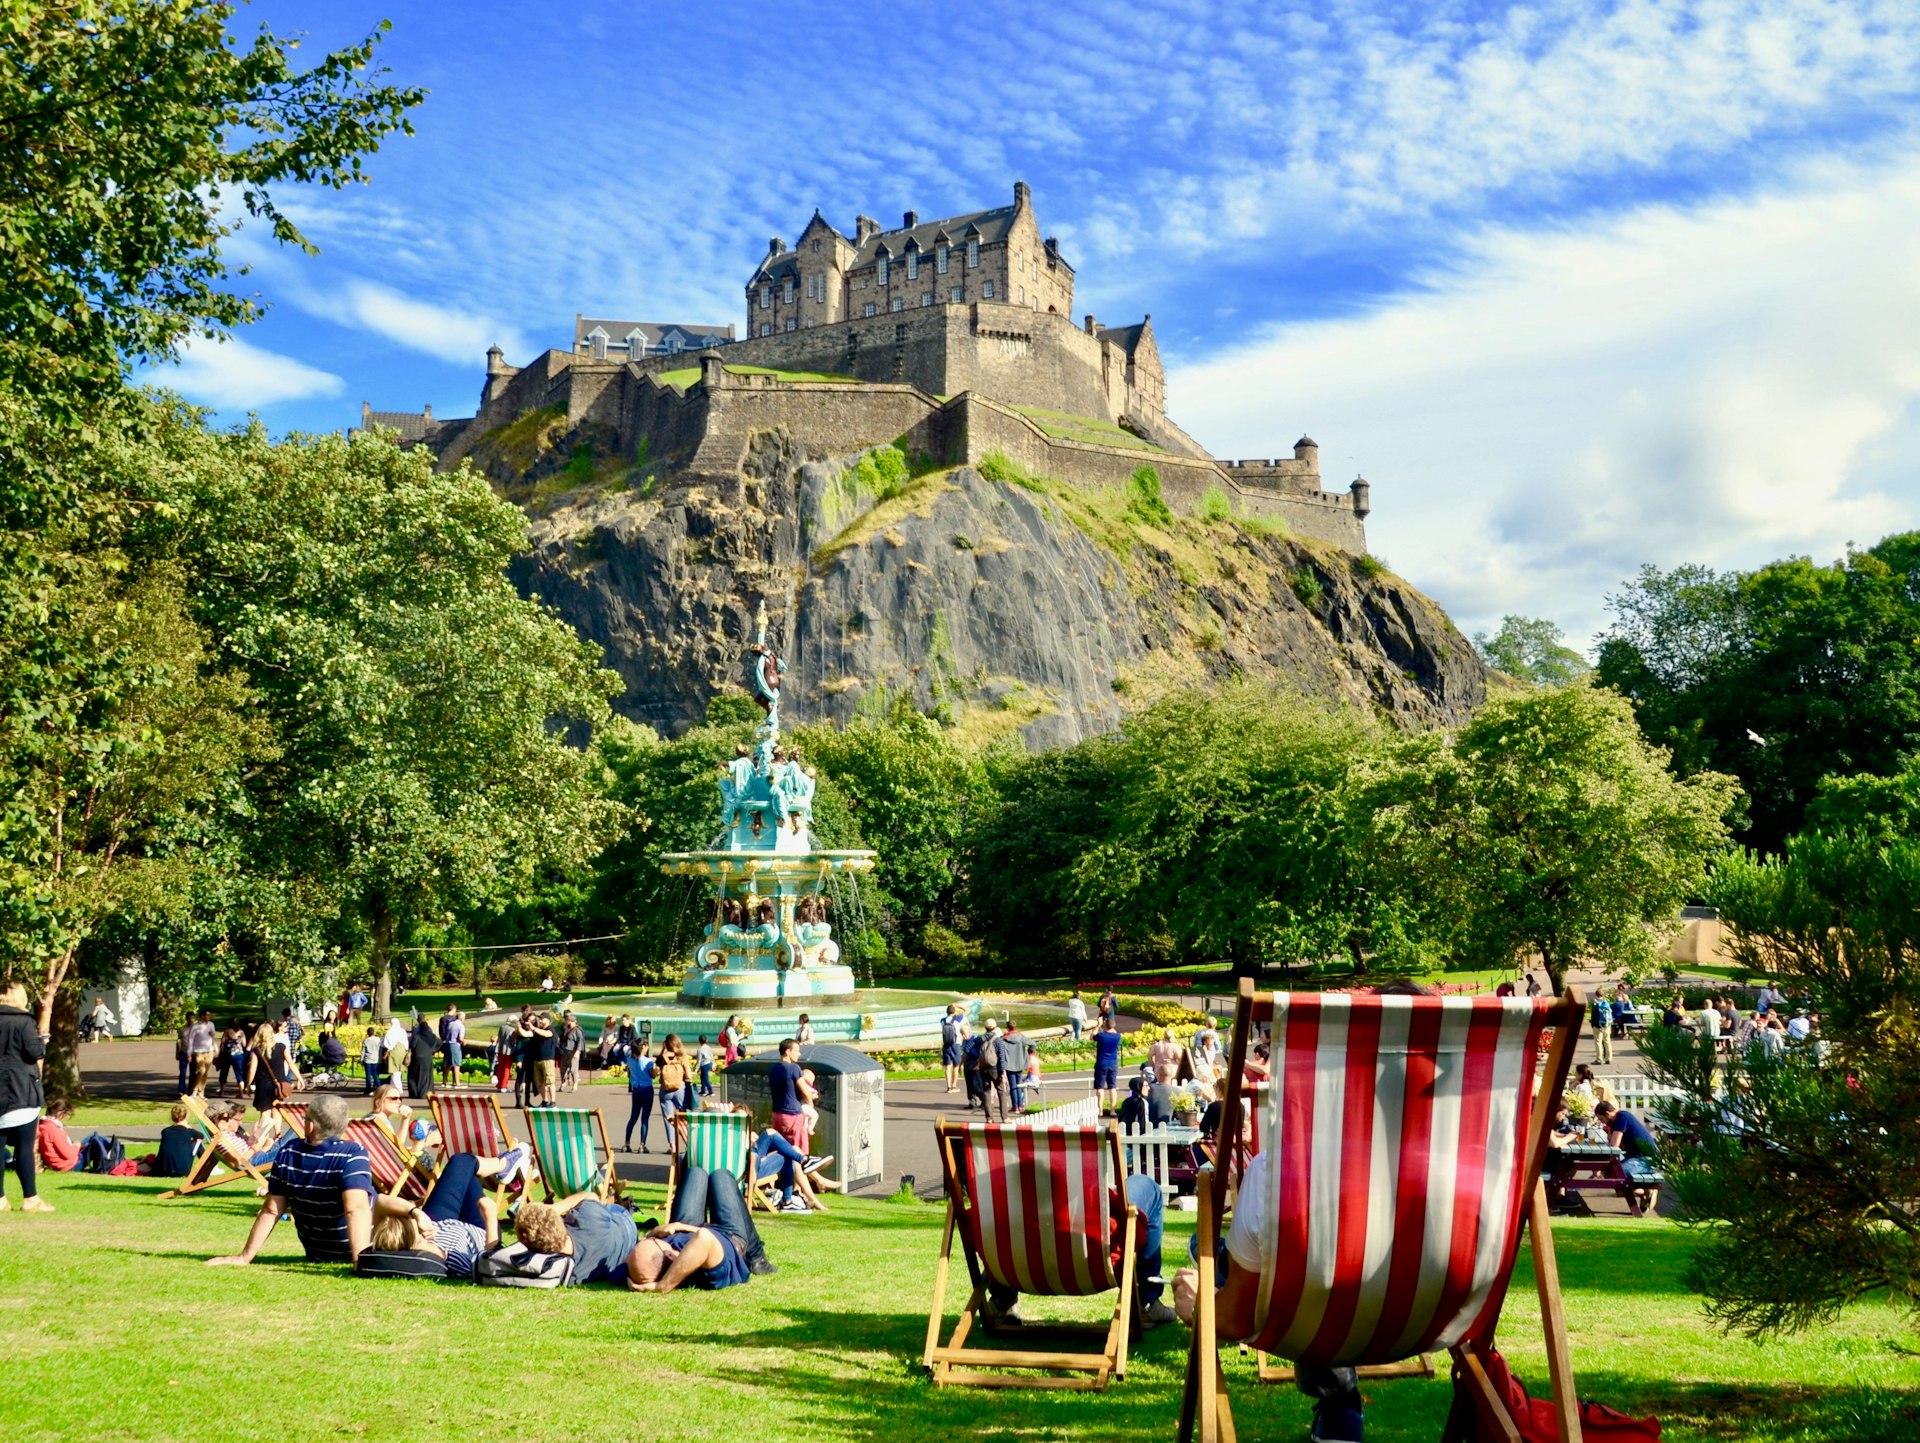 People sitting on the grass and relaxing in striped lawn chairs near Ross Fountain in Princes Street Gardens, with Edinburgh Castle above.